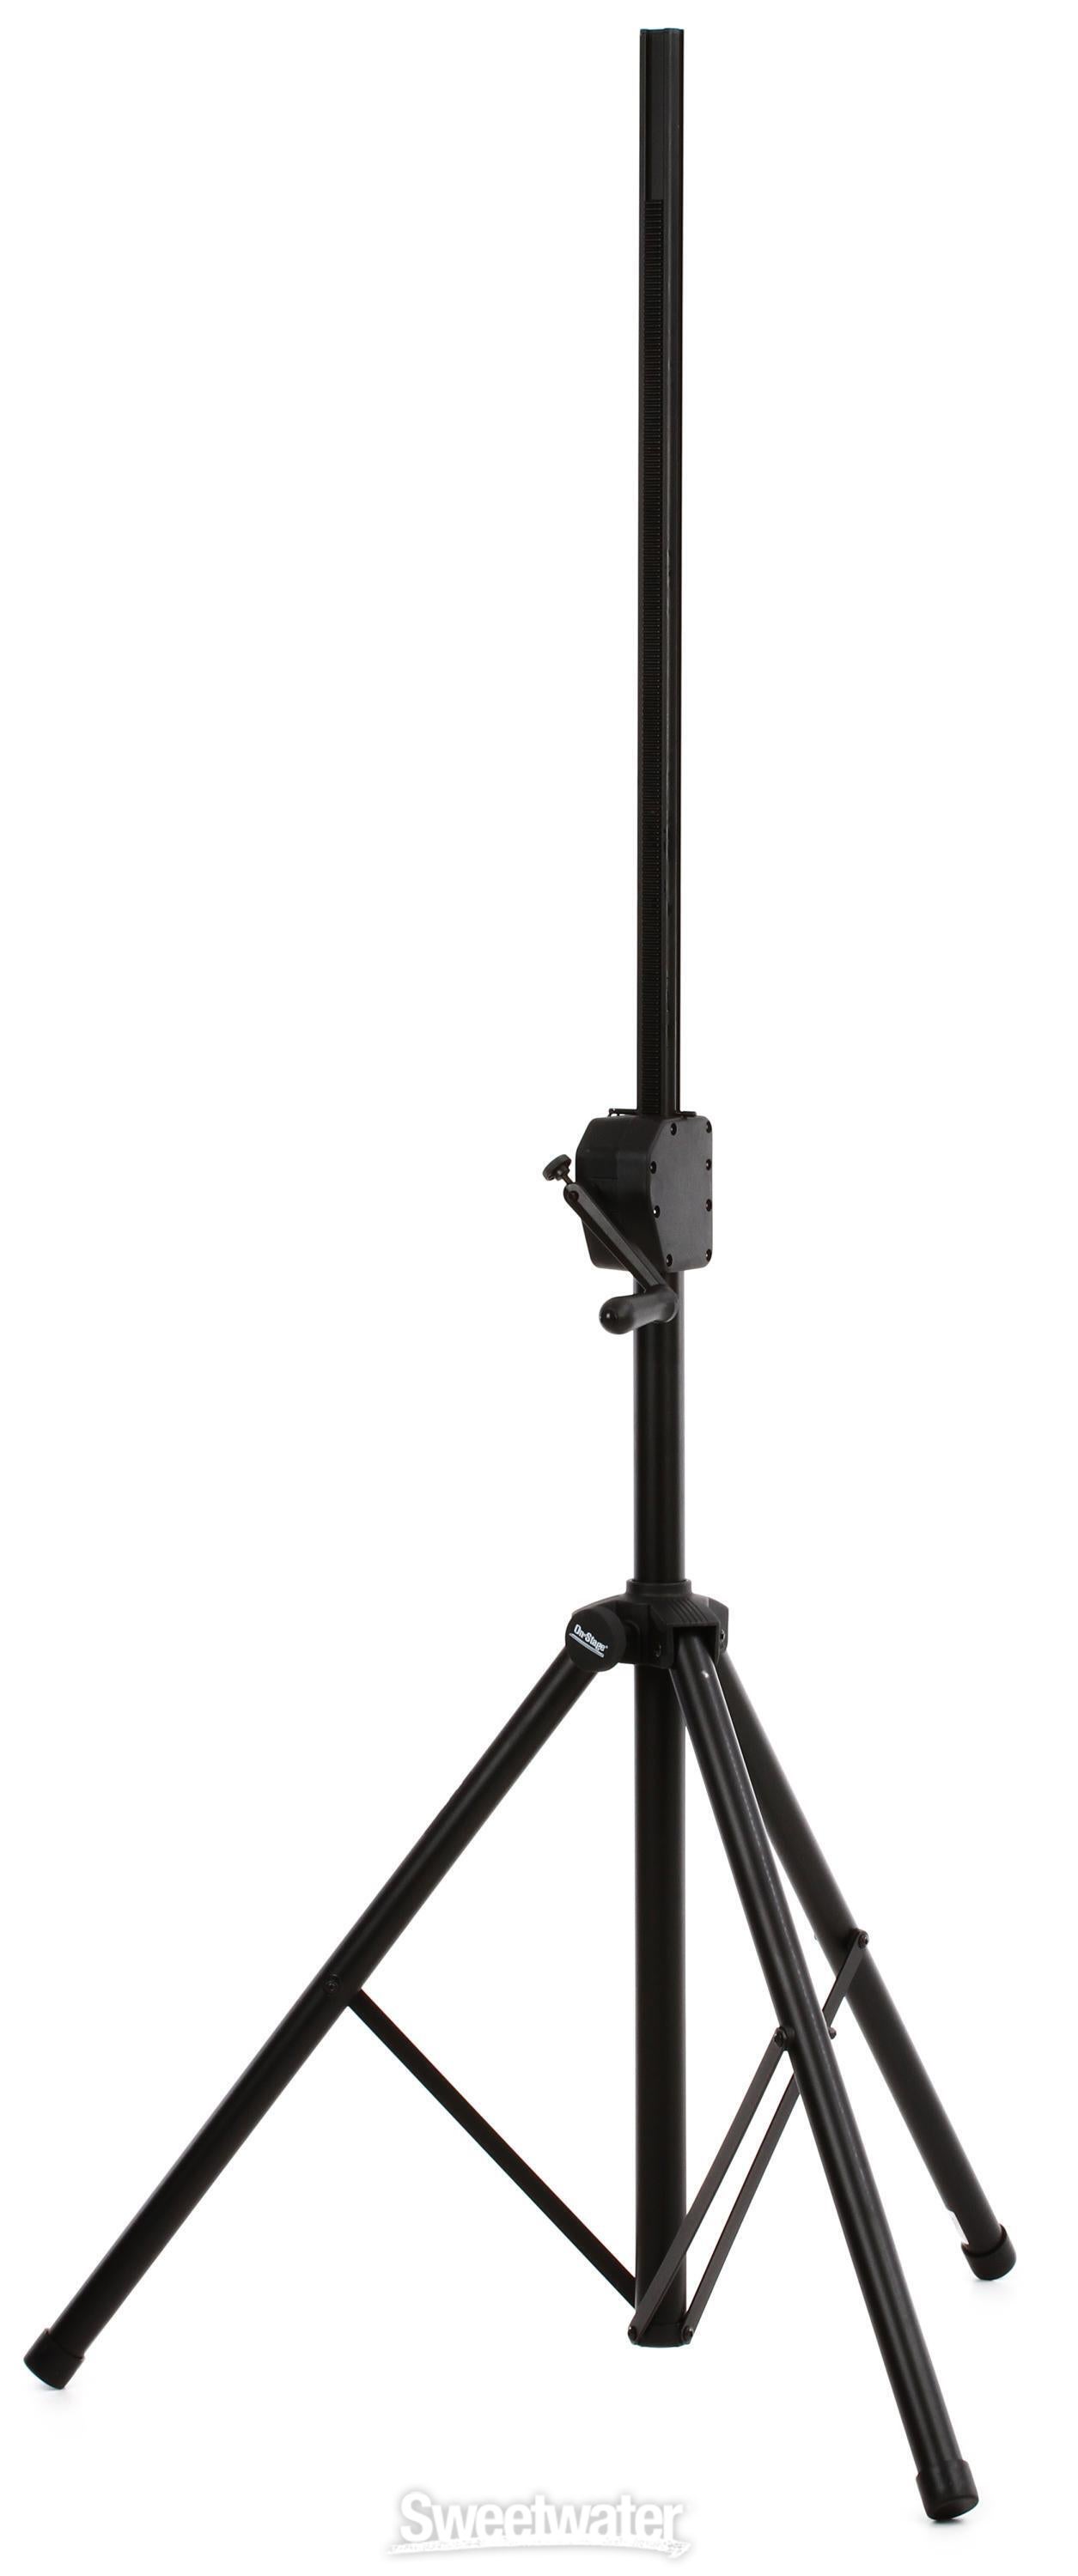 On-Stage SS8800B+ Power Crank-up Speaker Stand Sweetwater